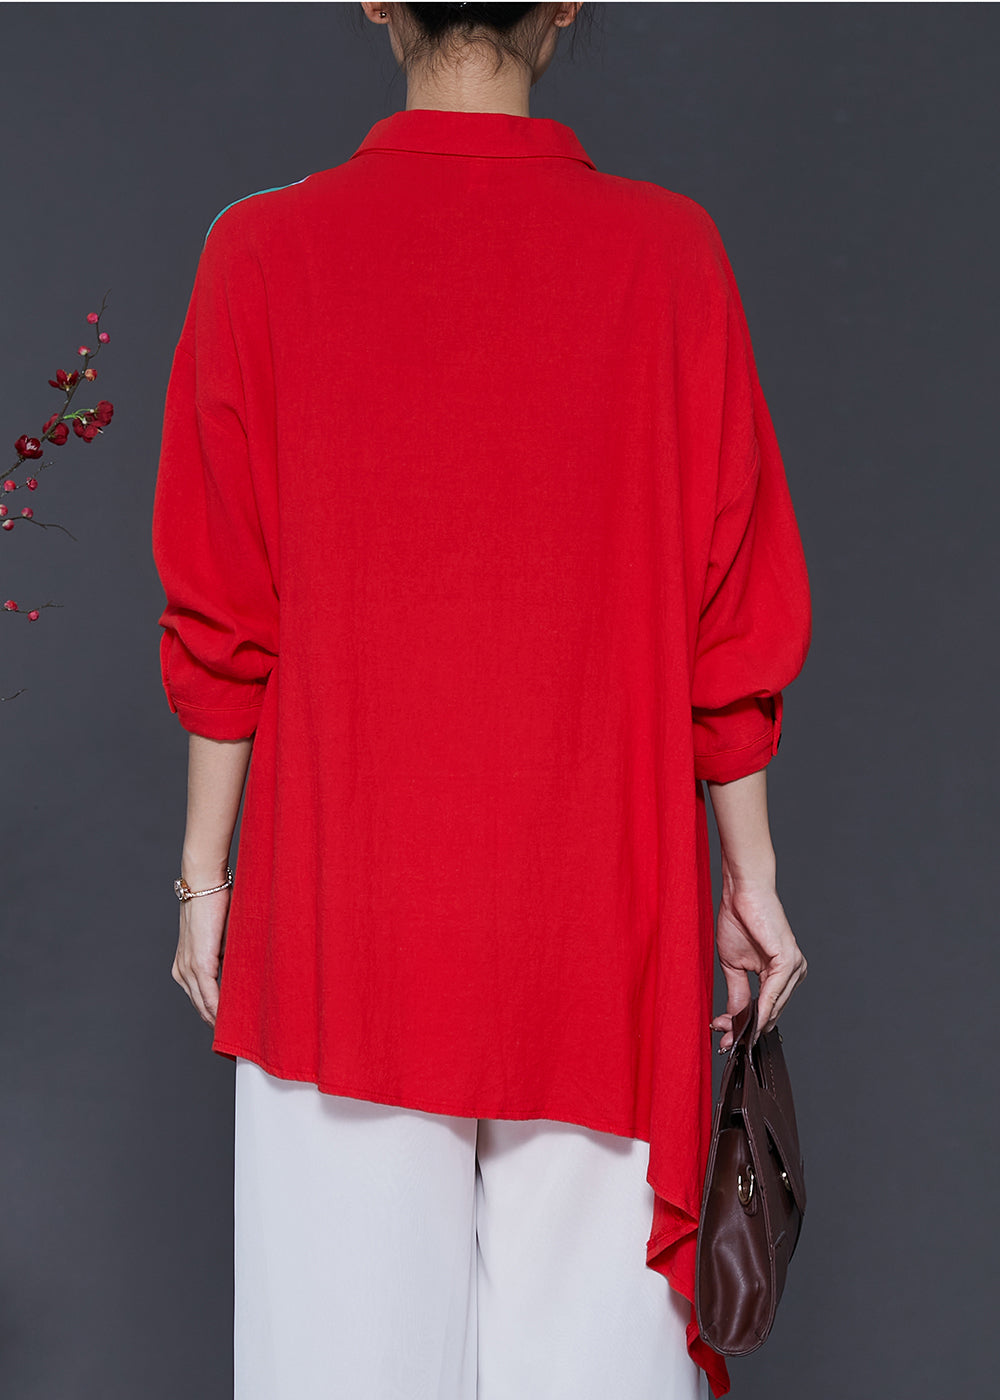 Red Patchwork Linen Blouse Top Oversized Spring